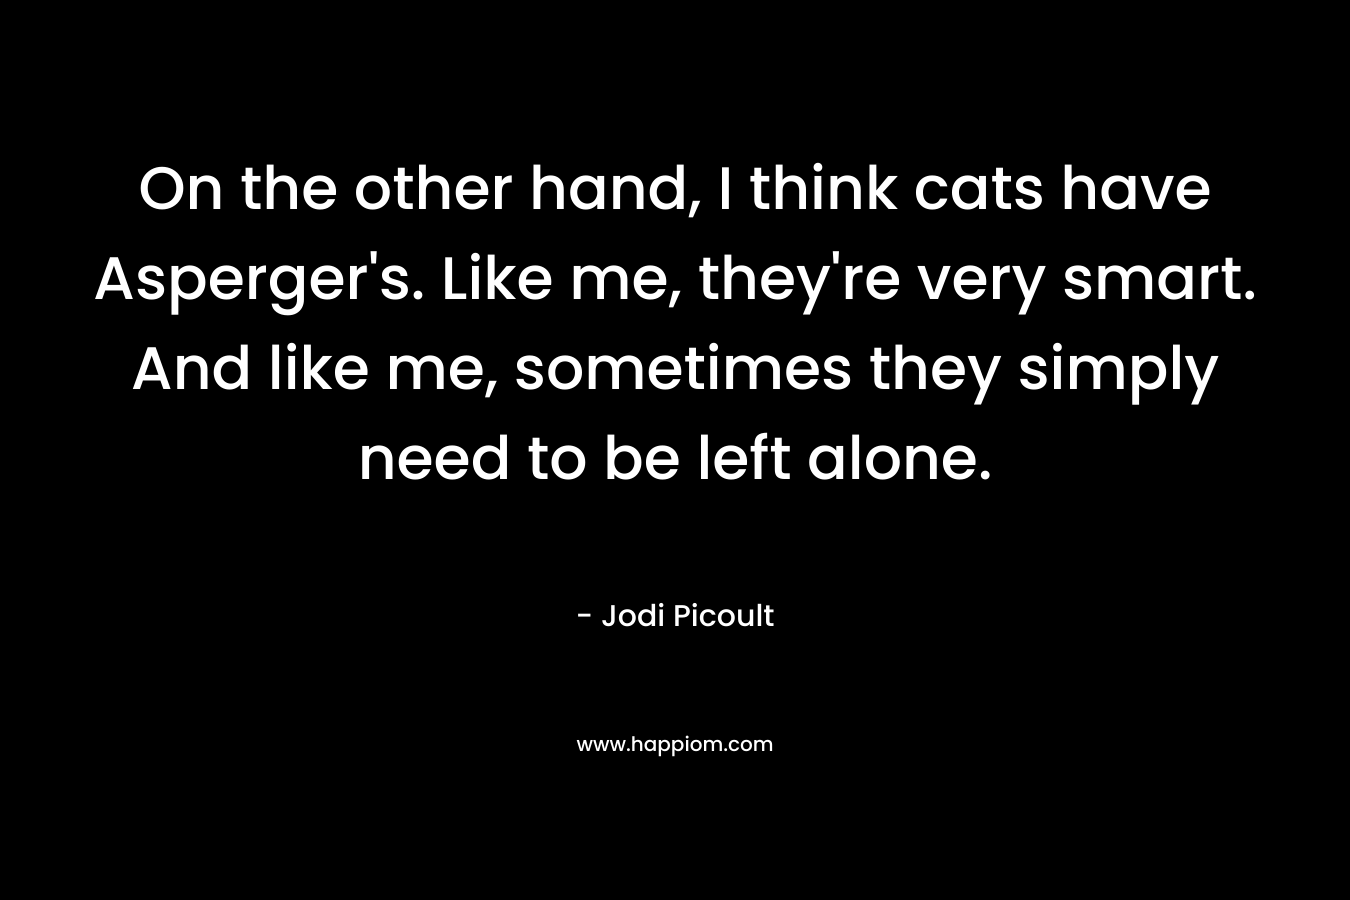 On the other hand, I think cats have Asperger’s. Like me, they’re very smart. And like me, sometimes they simply need to be left alone. – Jodi Picoult